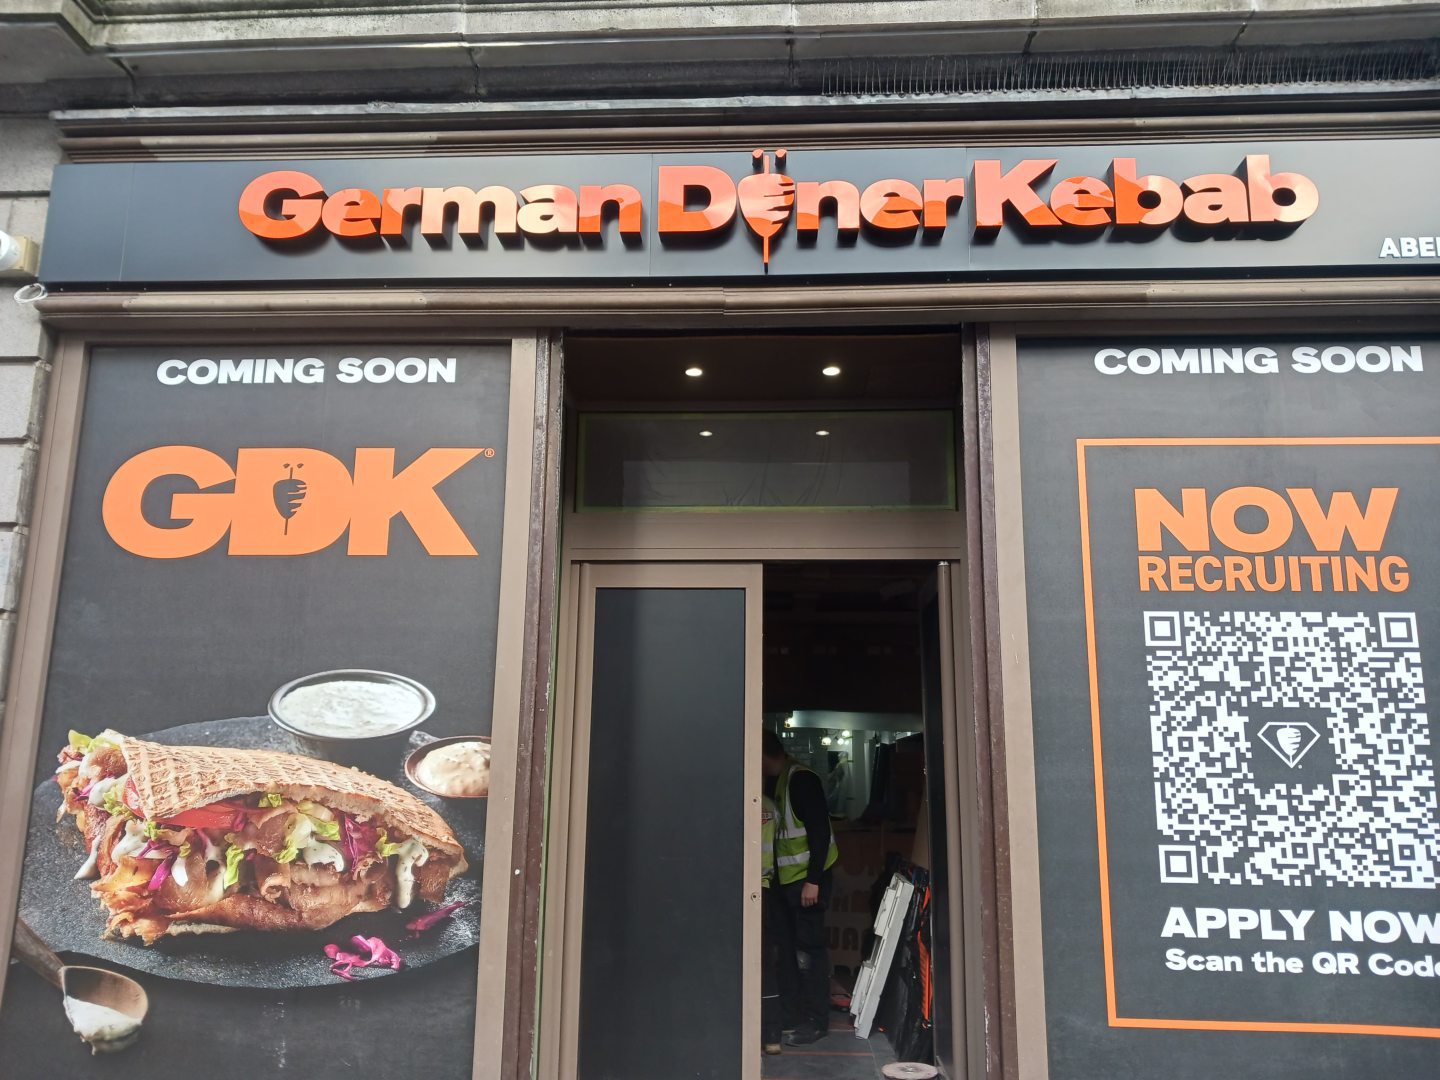 The new German Doner Kebab shop on Union Street in Aberdeen